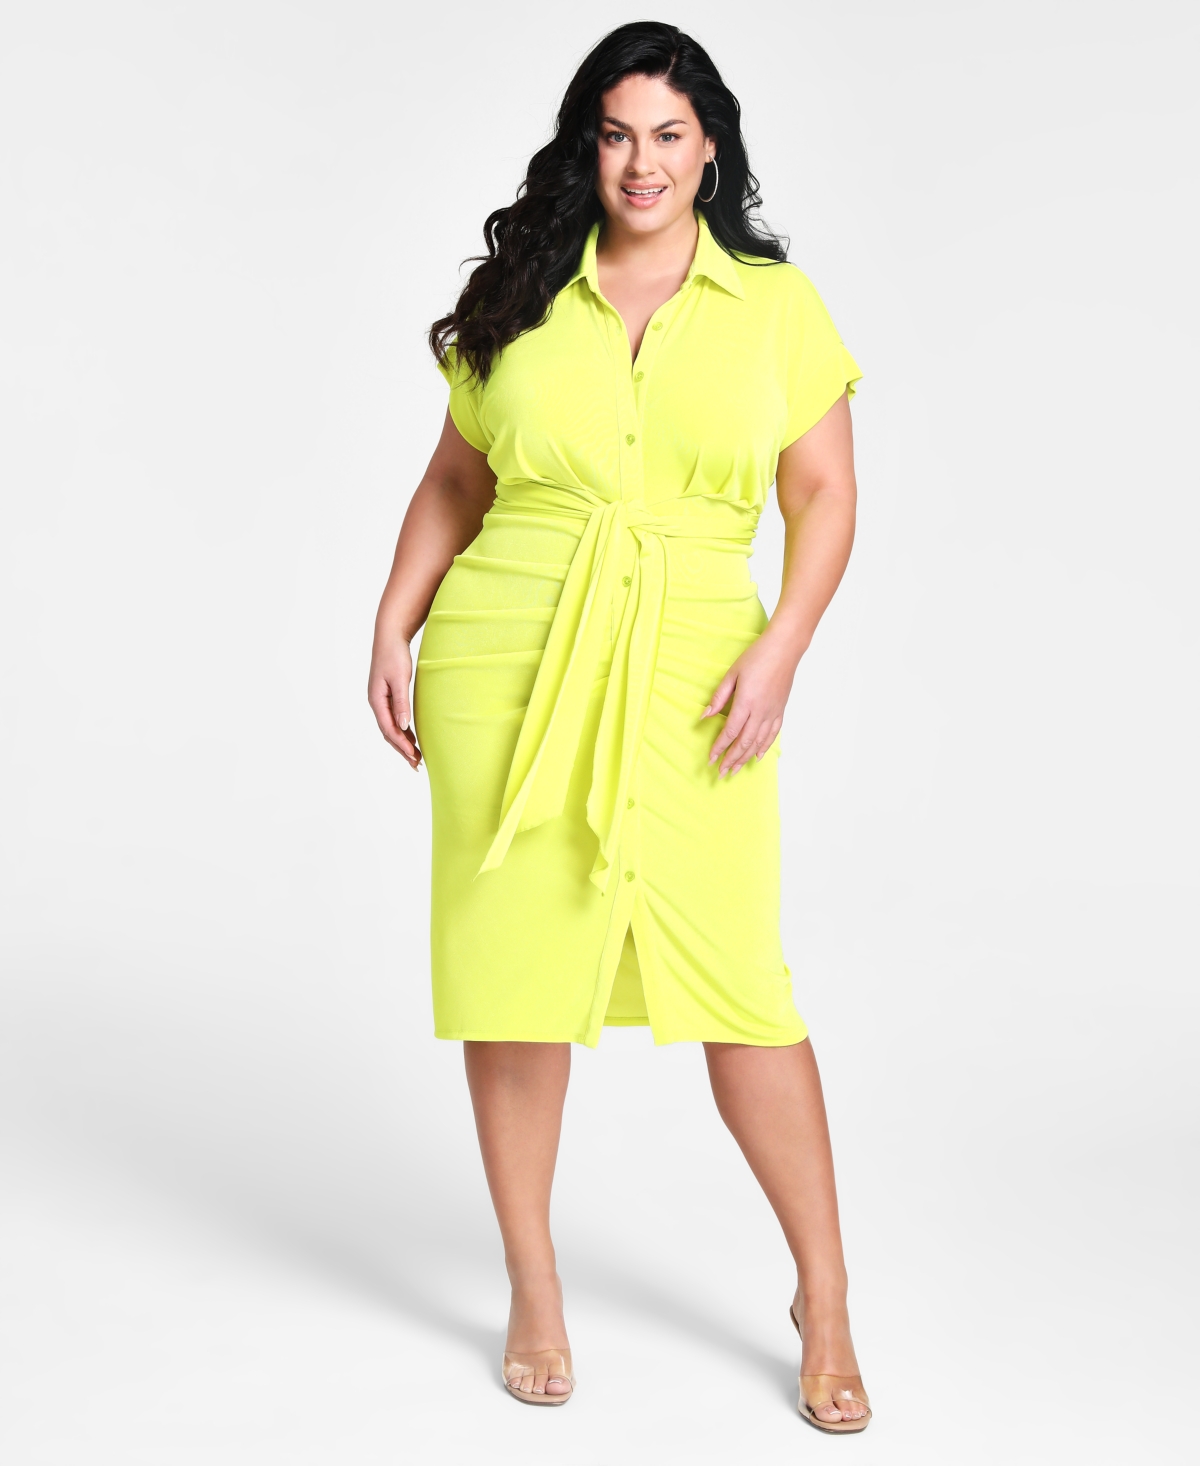 Nina Parker Trendy Plus Size Bodycon Ruched Dress - Macy's